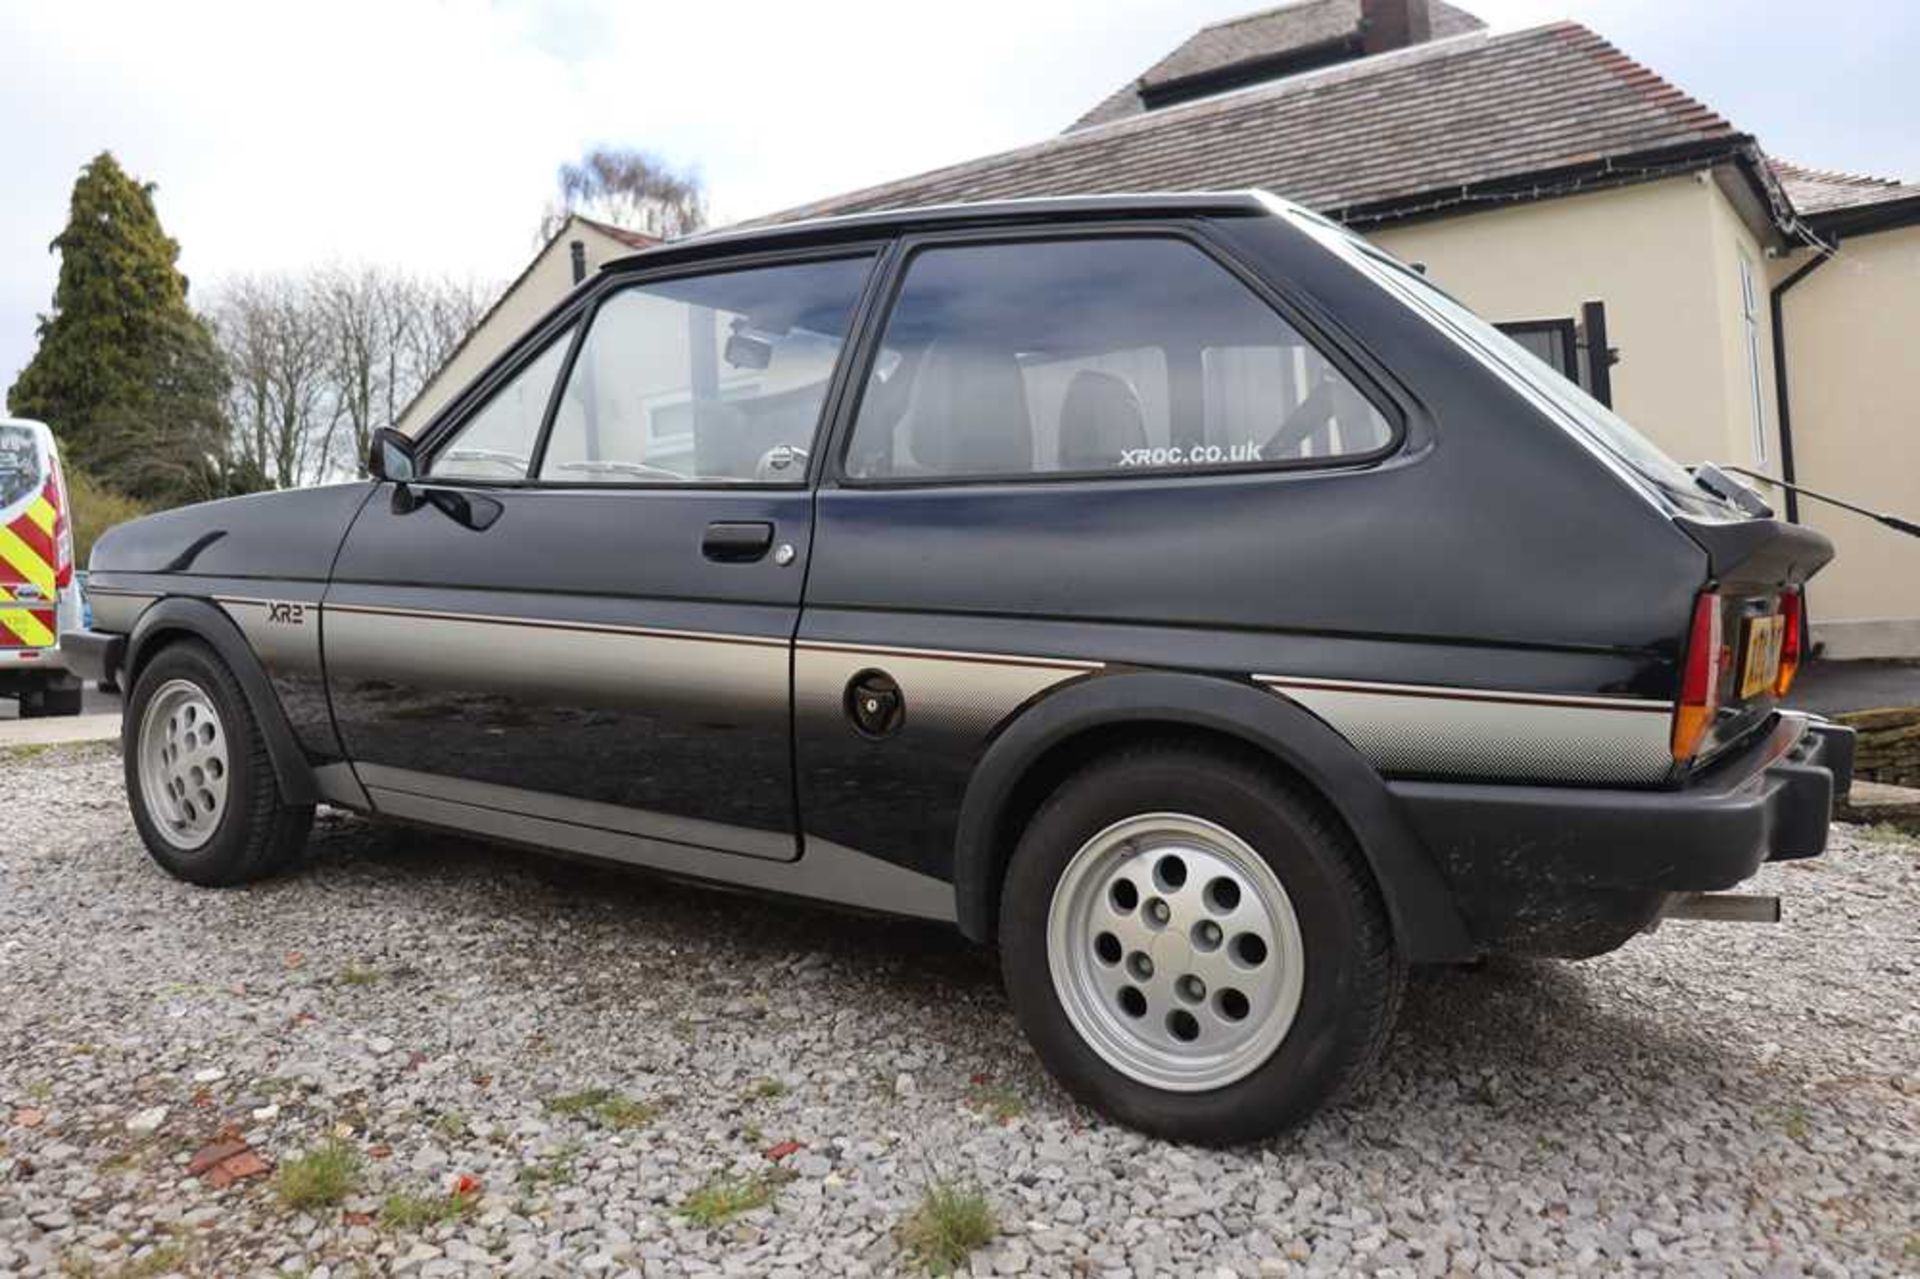 1983 Ford Fiesta XR2 - Image 13 of 56